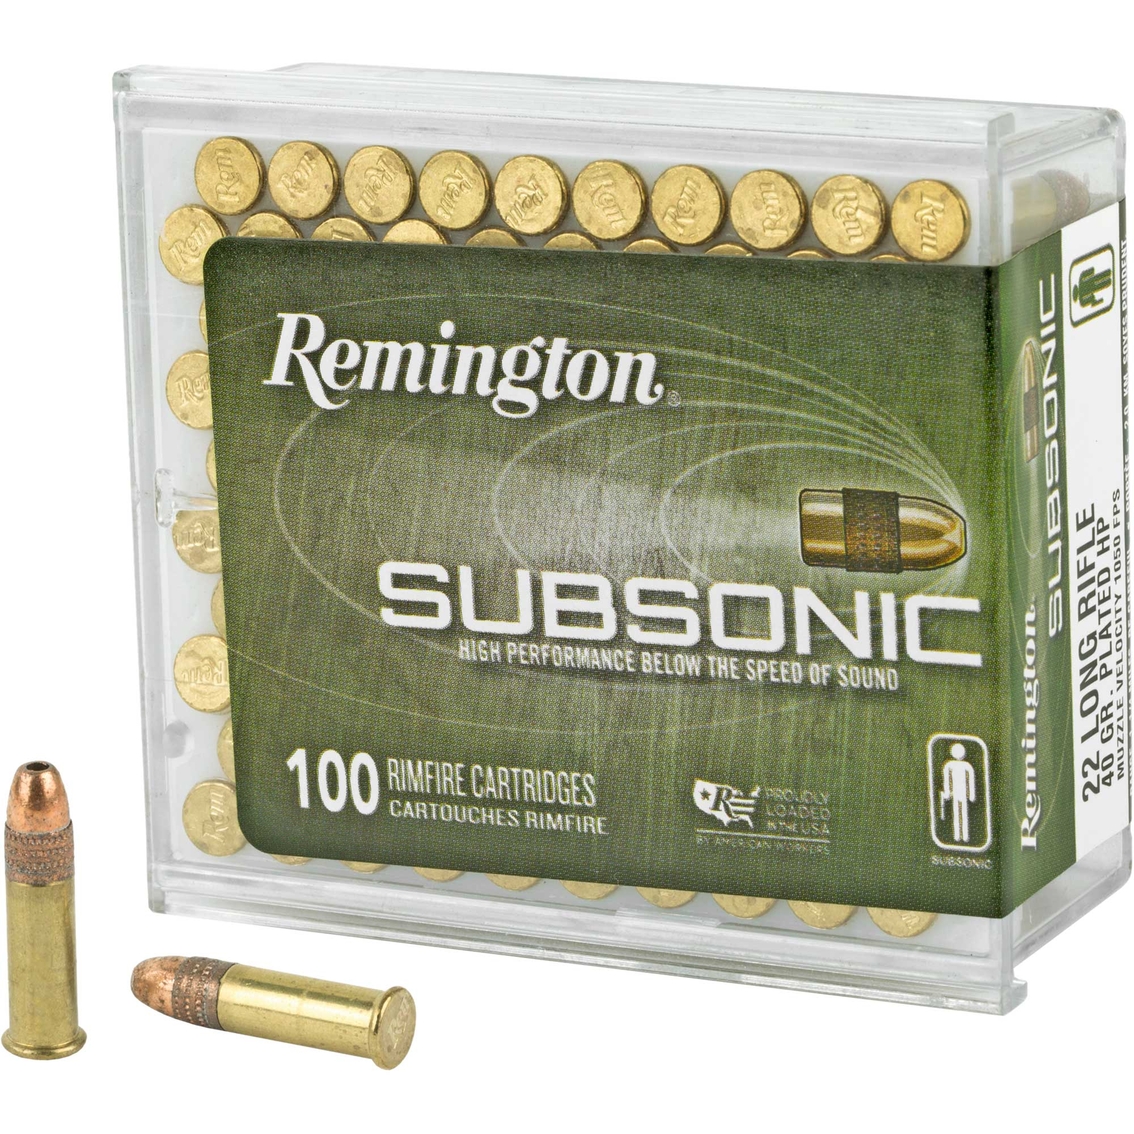 Remington Subsonic .22 LR 40 Gr. Copper Plated Hollow Point 100 Rounds - Image 3 of 3